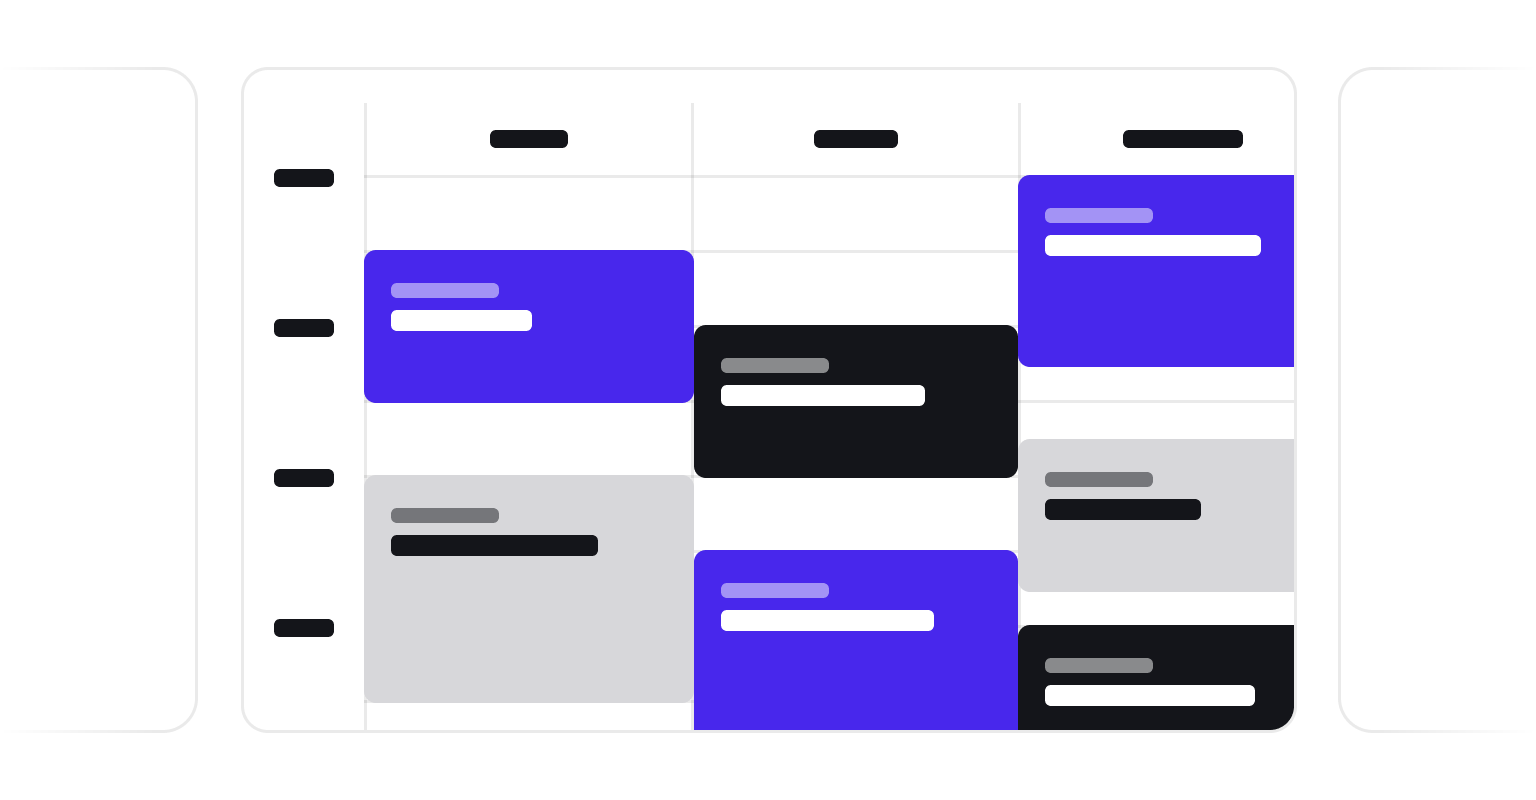 Weekly Schedule Template in HTML, CSS and JavaScript CodyHouse